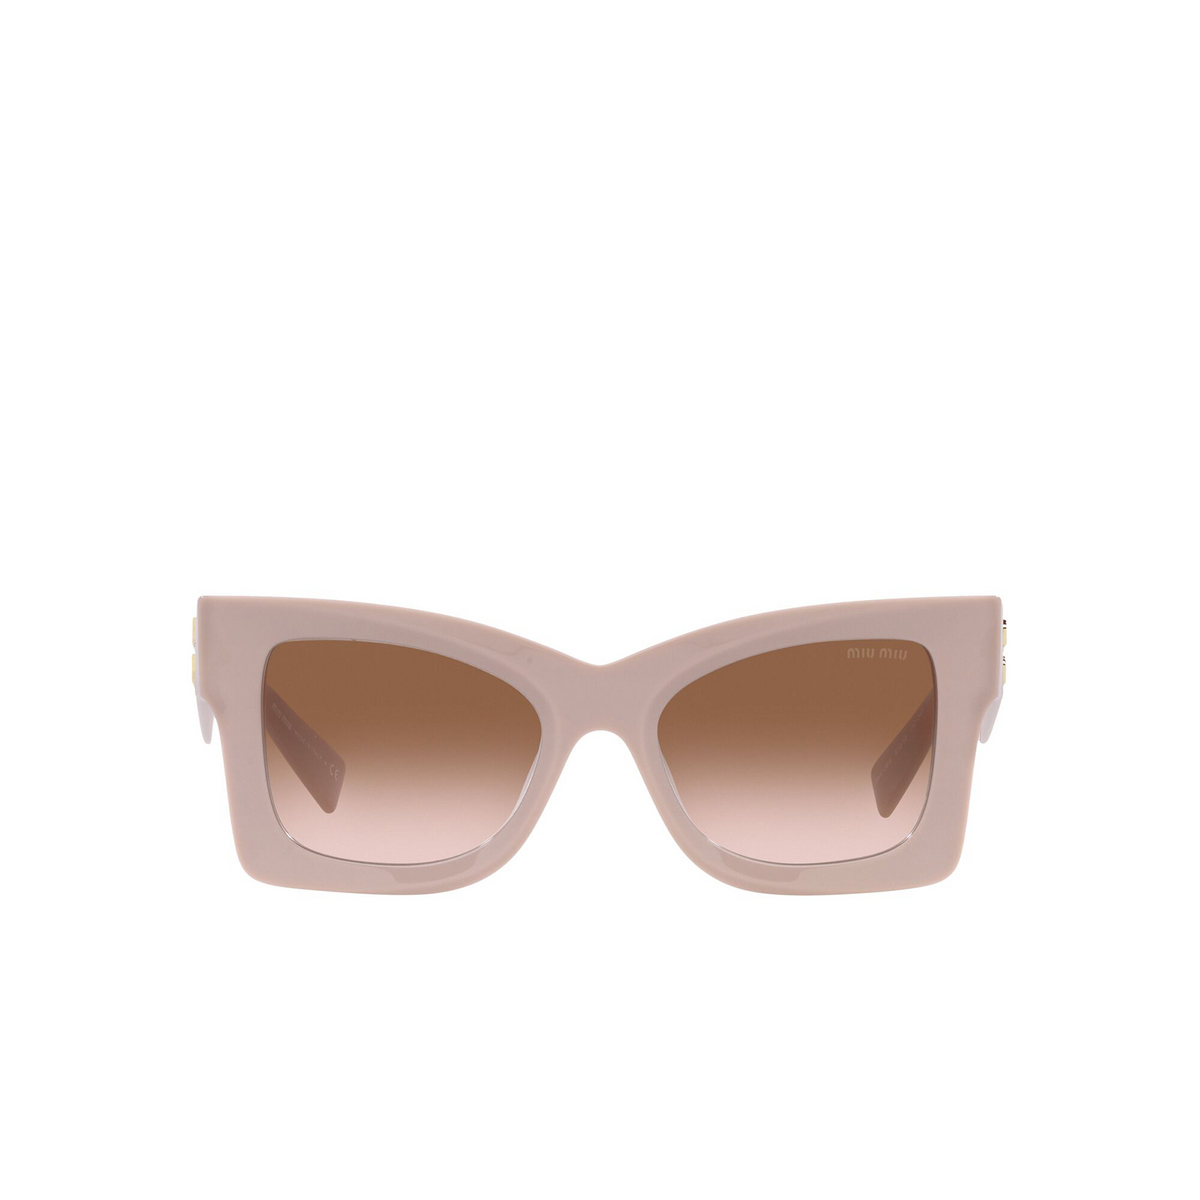 Miu Miu® Butterfly Sunglasses: MU 08WS color Pink 17C0A6 - front view.